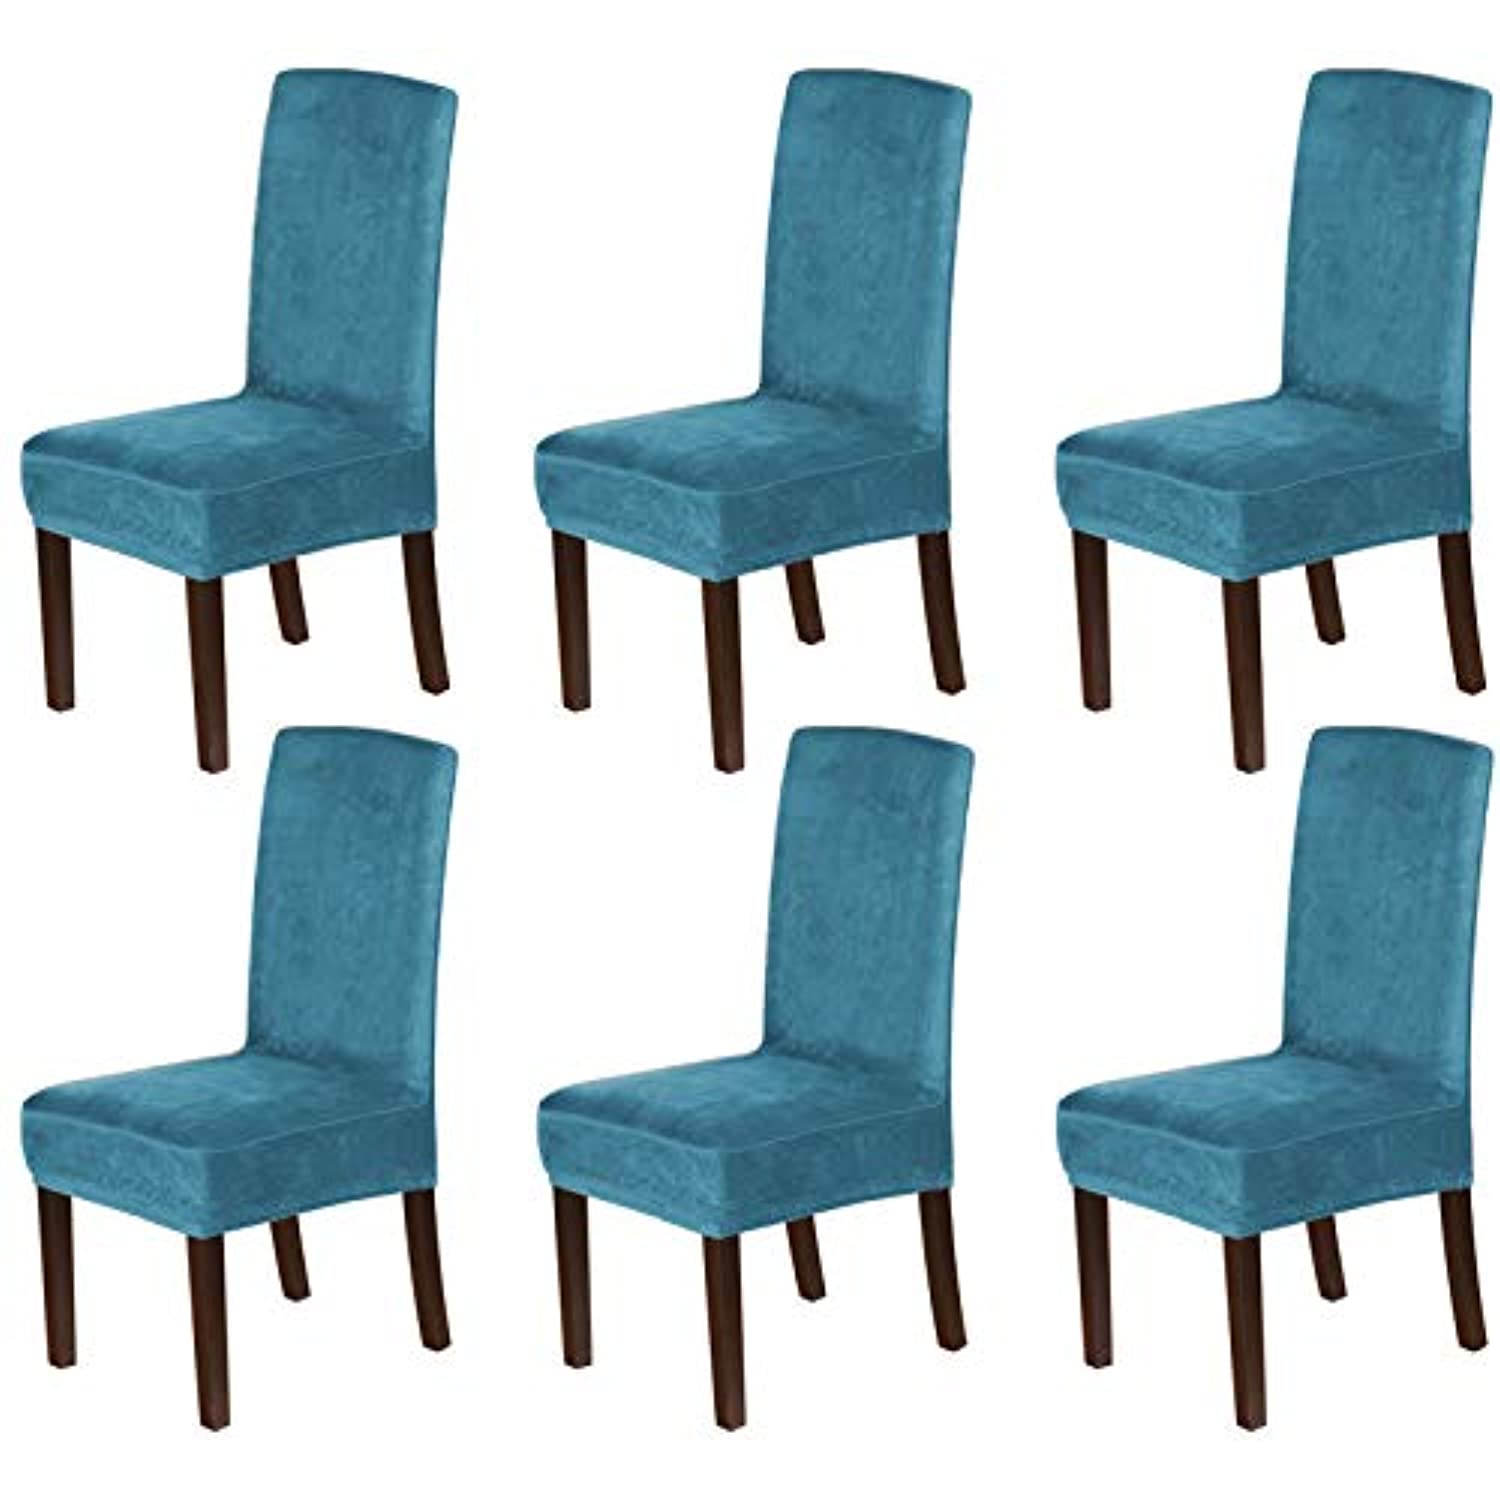 Stretch Velvet Dining Chair Covers Set of 6 Chair Covers for Dining Room Parsons Chair Slipcover Peacock Blue